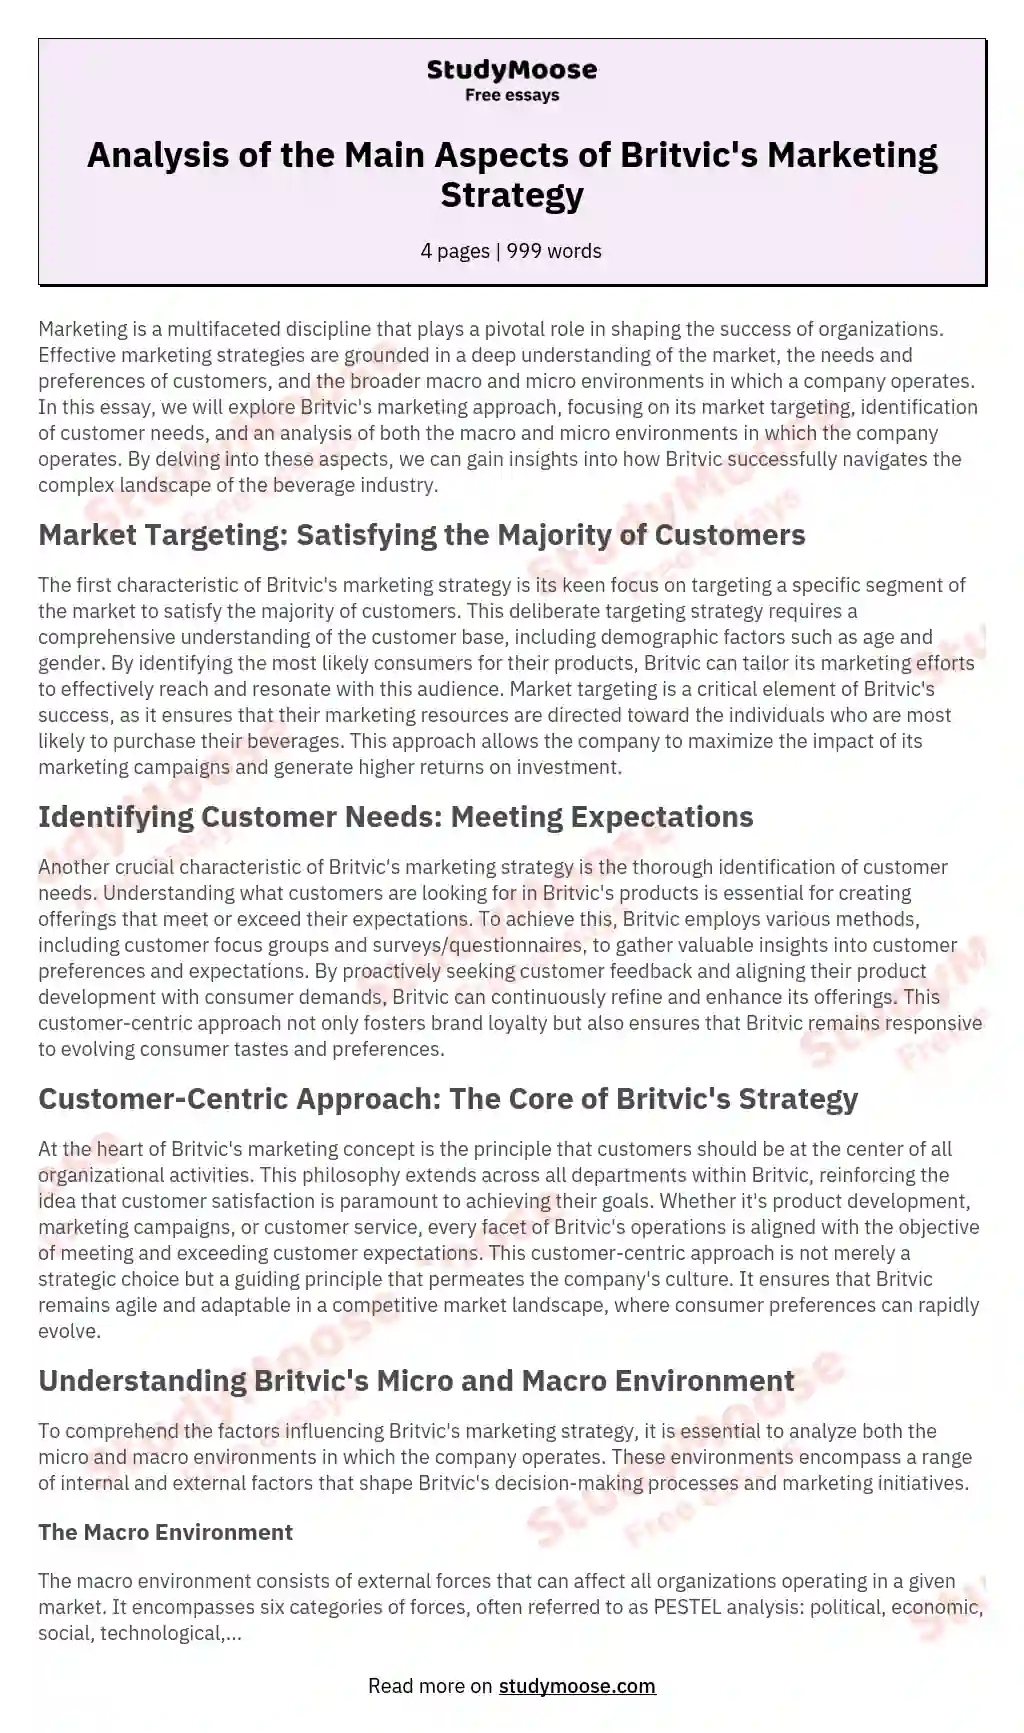 Analysis of the Main Aspects of Britvic's Marketing Strategy essay